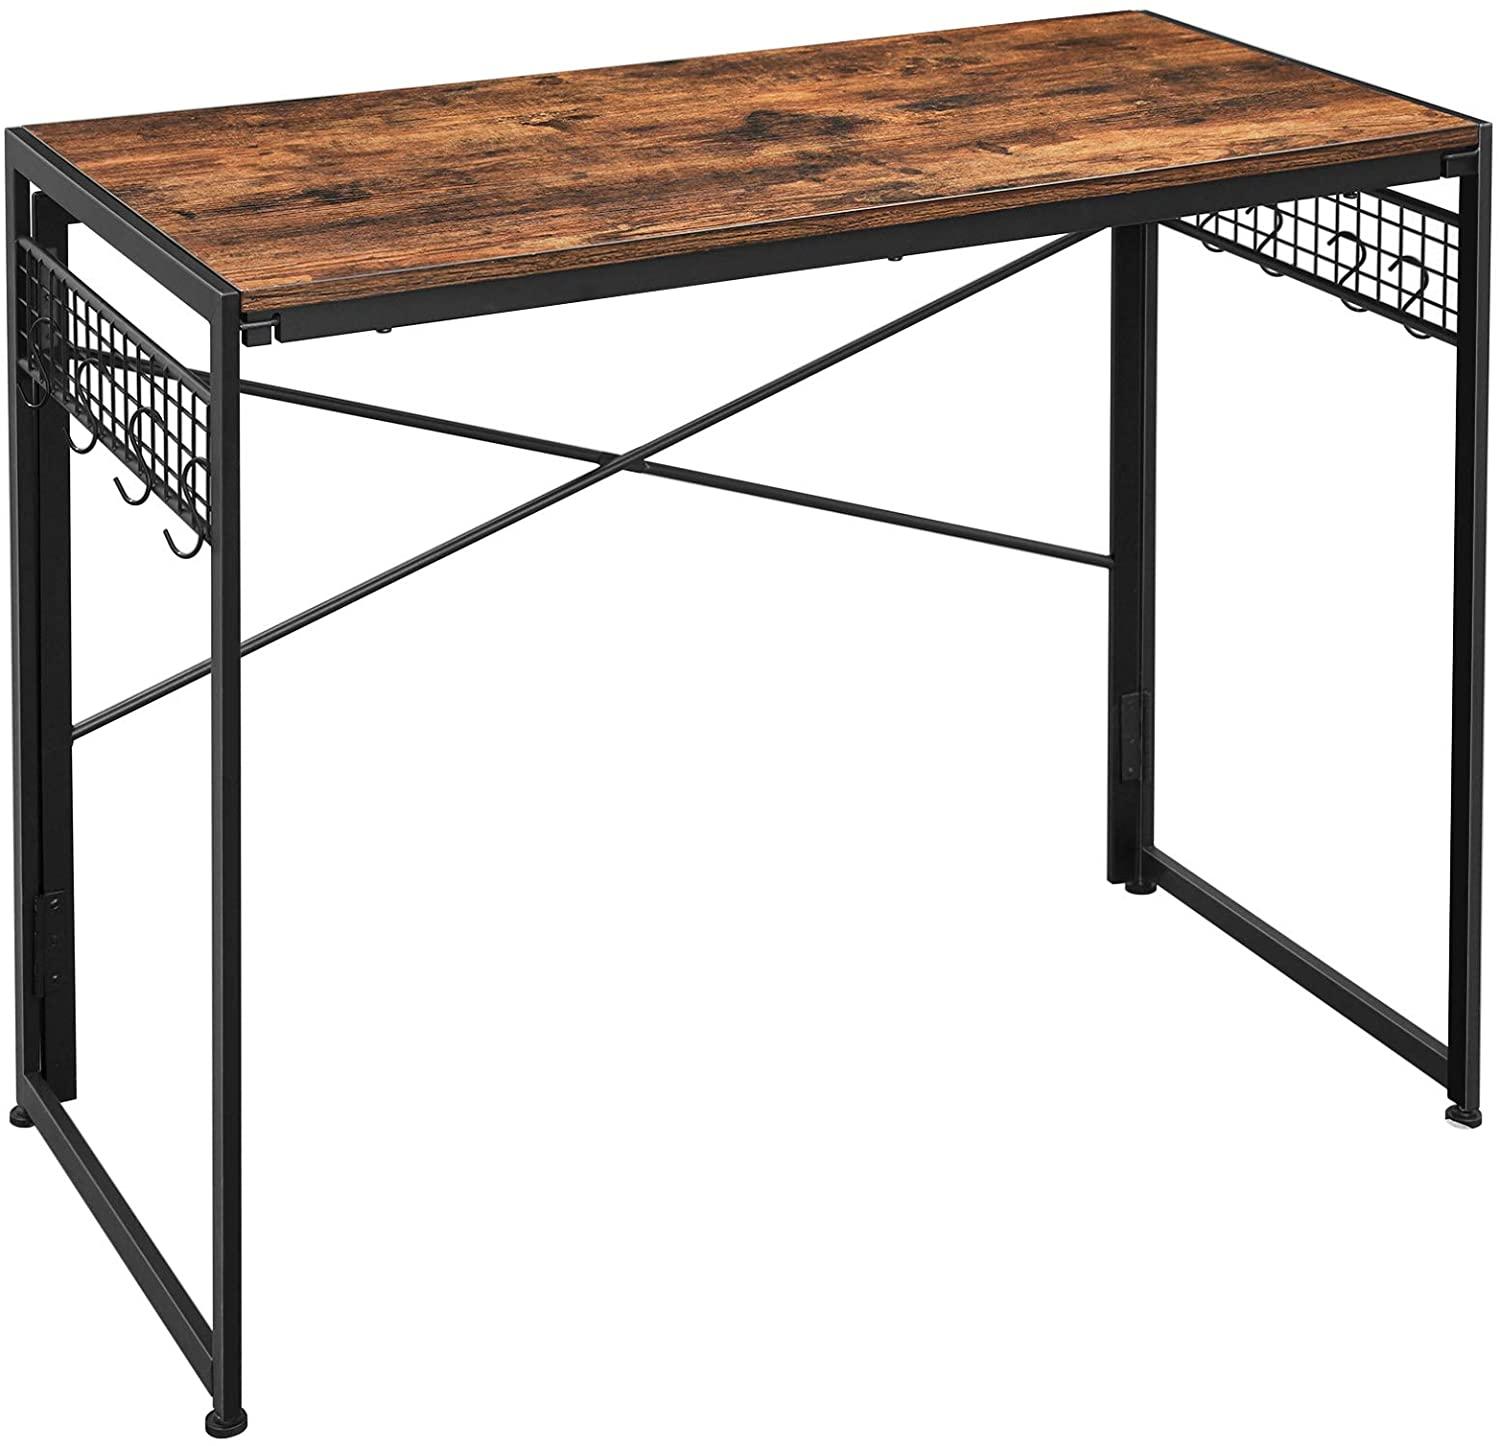 39in Vasagle Folding Computer Desk for $45.59 Shipped